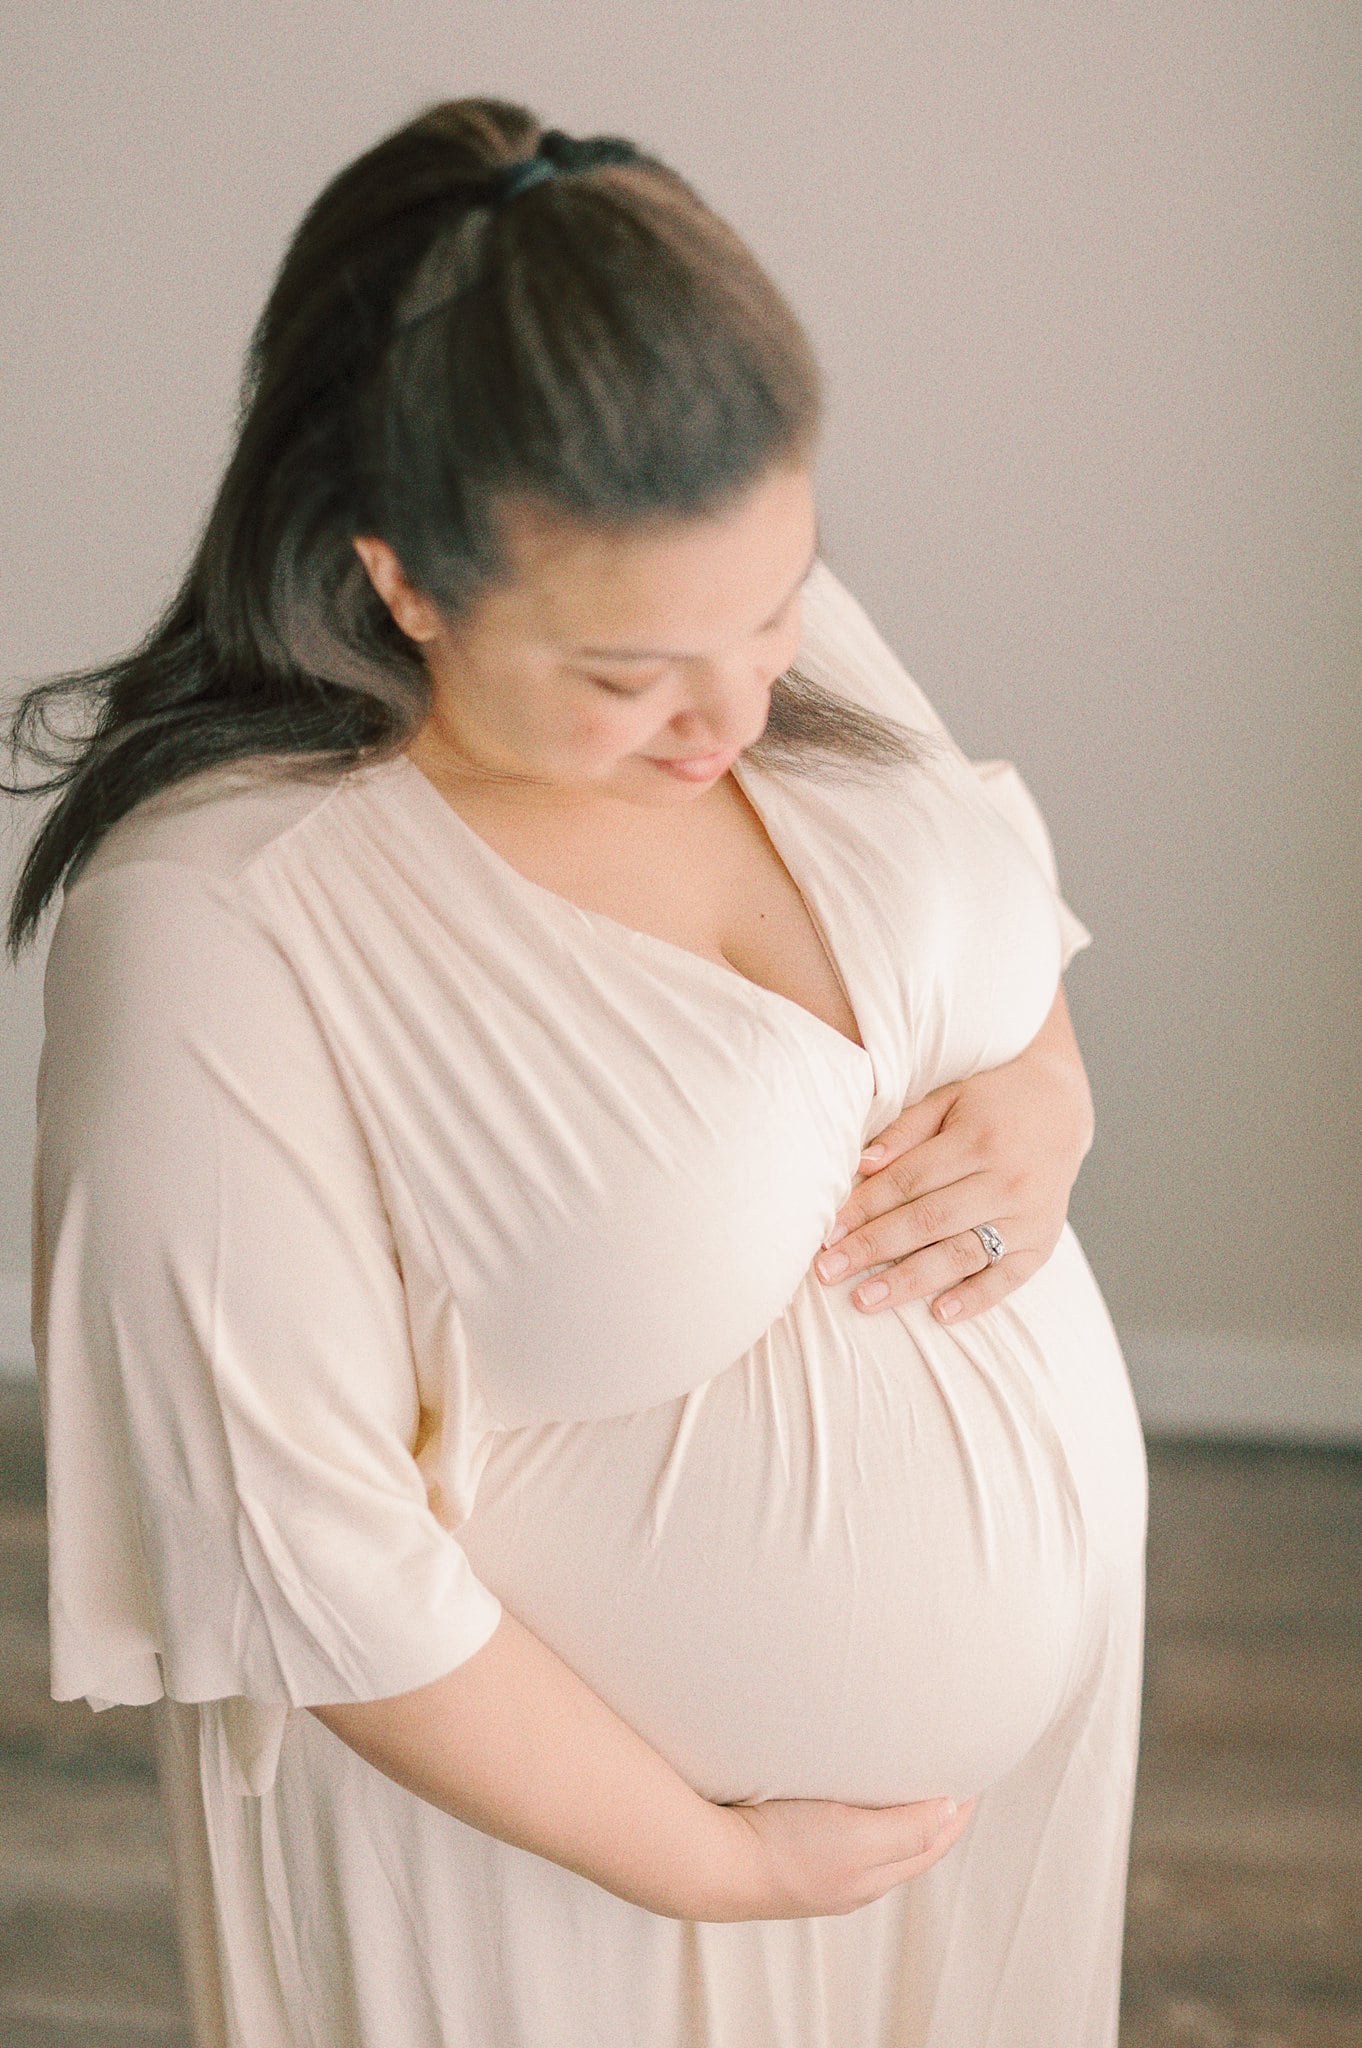 A mother to bee stands in a studio in a white maternity gown holding her bump